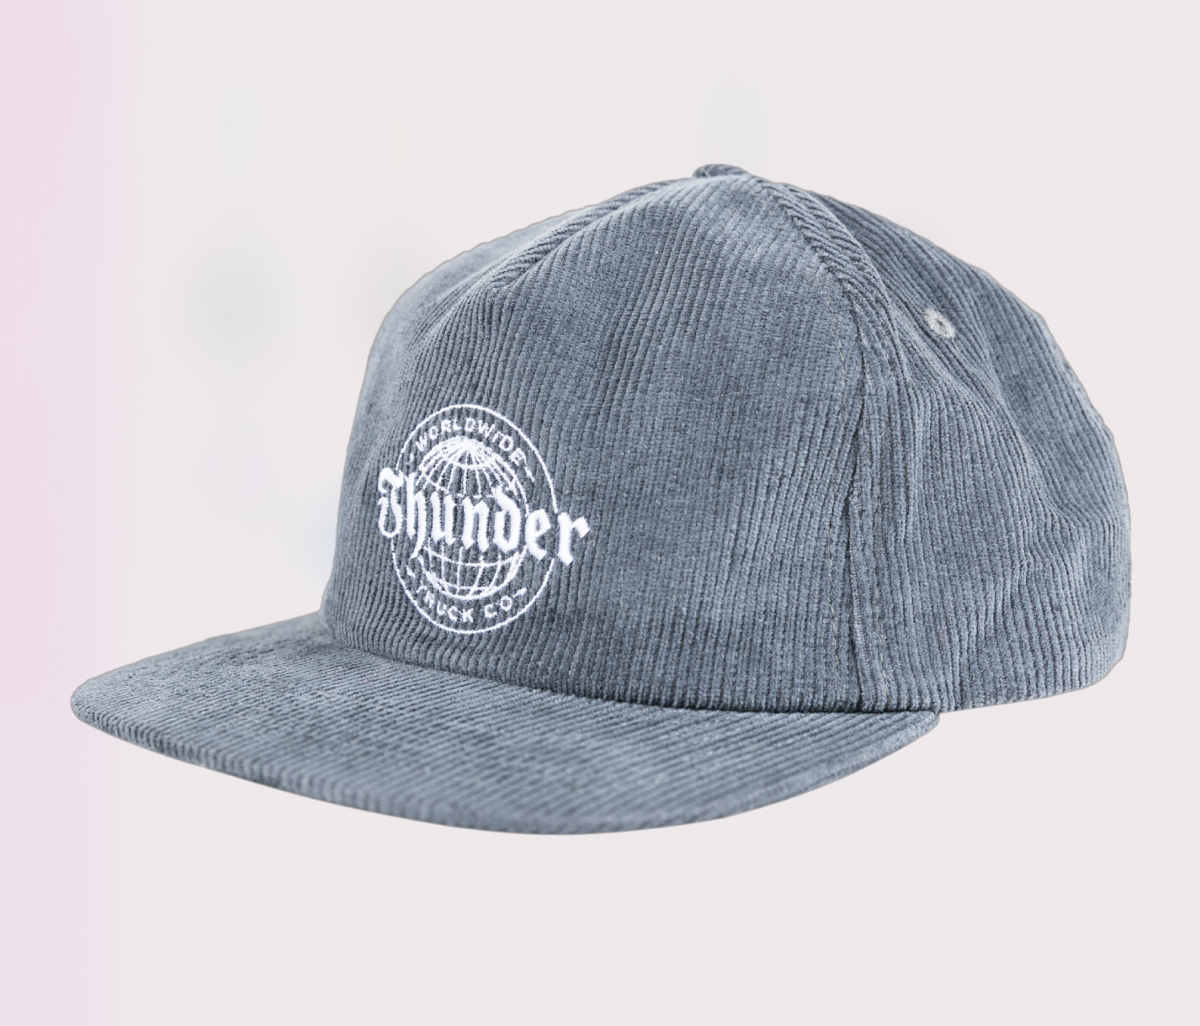 Thunder Cord snapback cap aftershock world wide